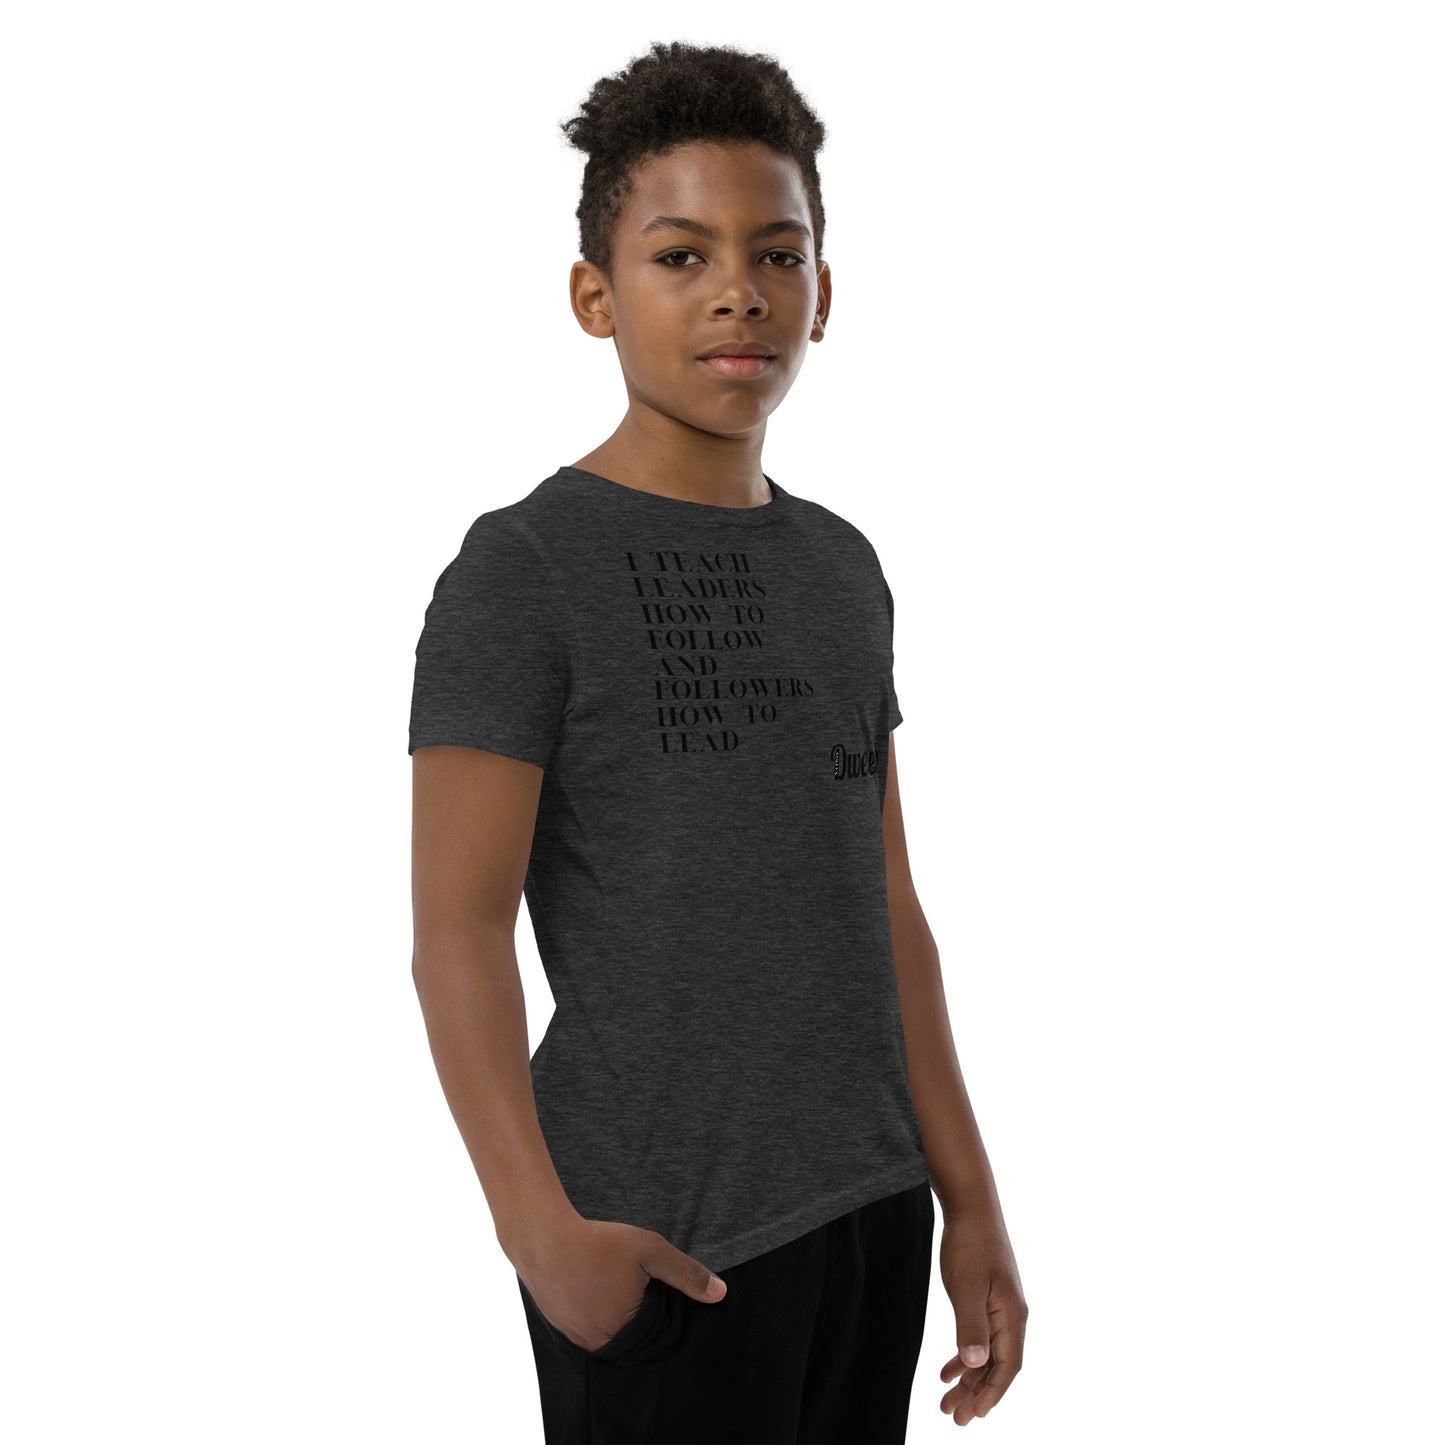 Dweeb Nation Leaders T-Shirt - Youth